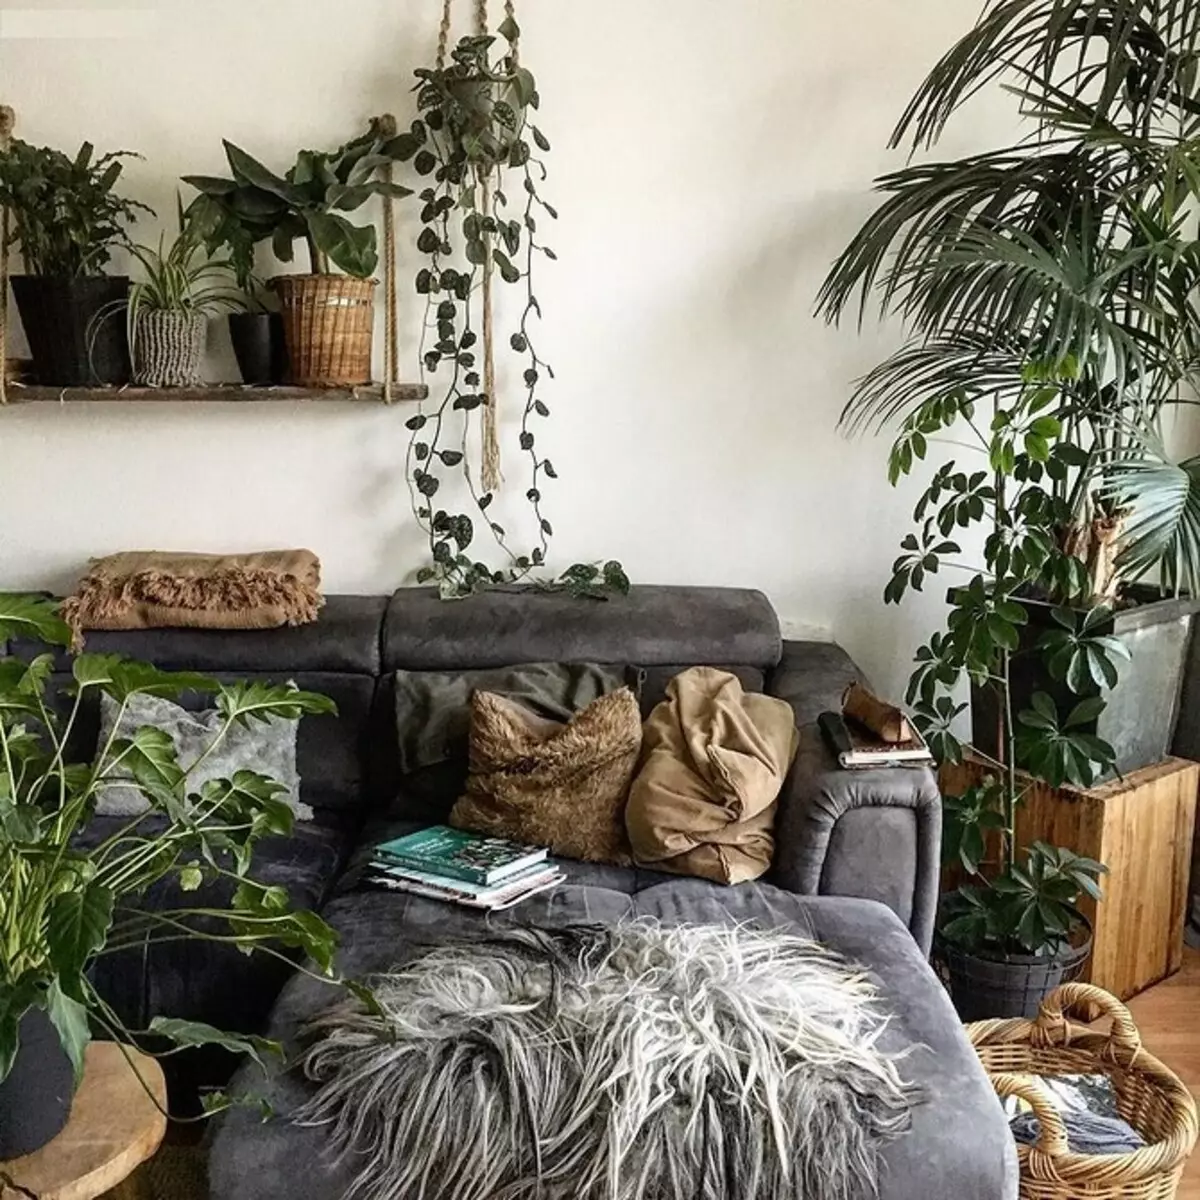 12 Simple details for creating a relaxed interior in the style of boho 10676_15